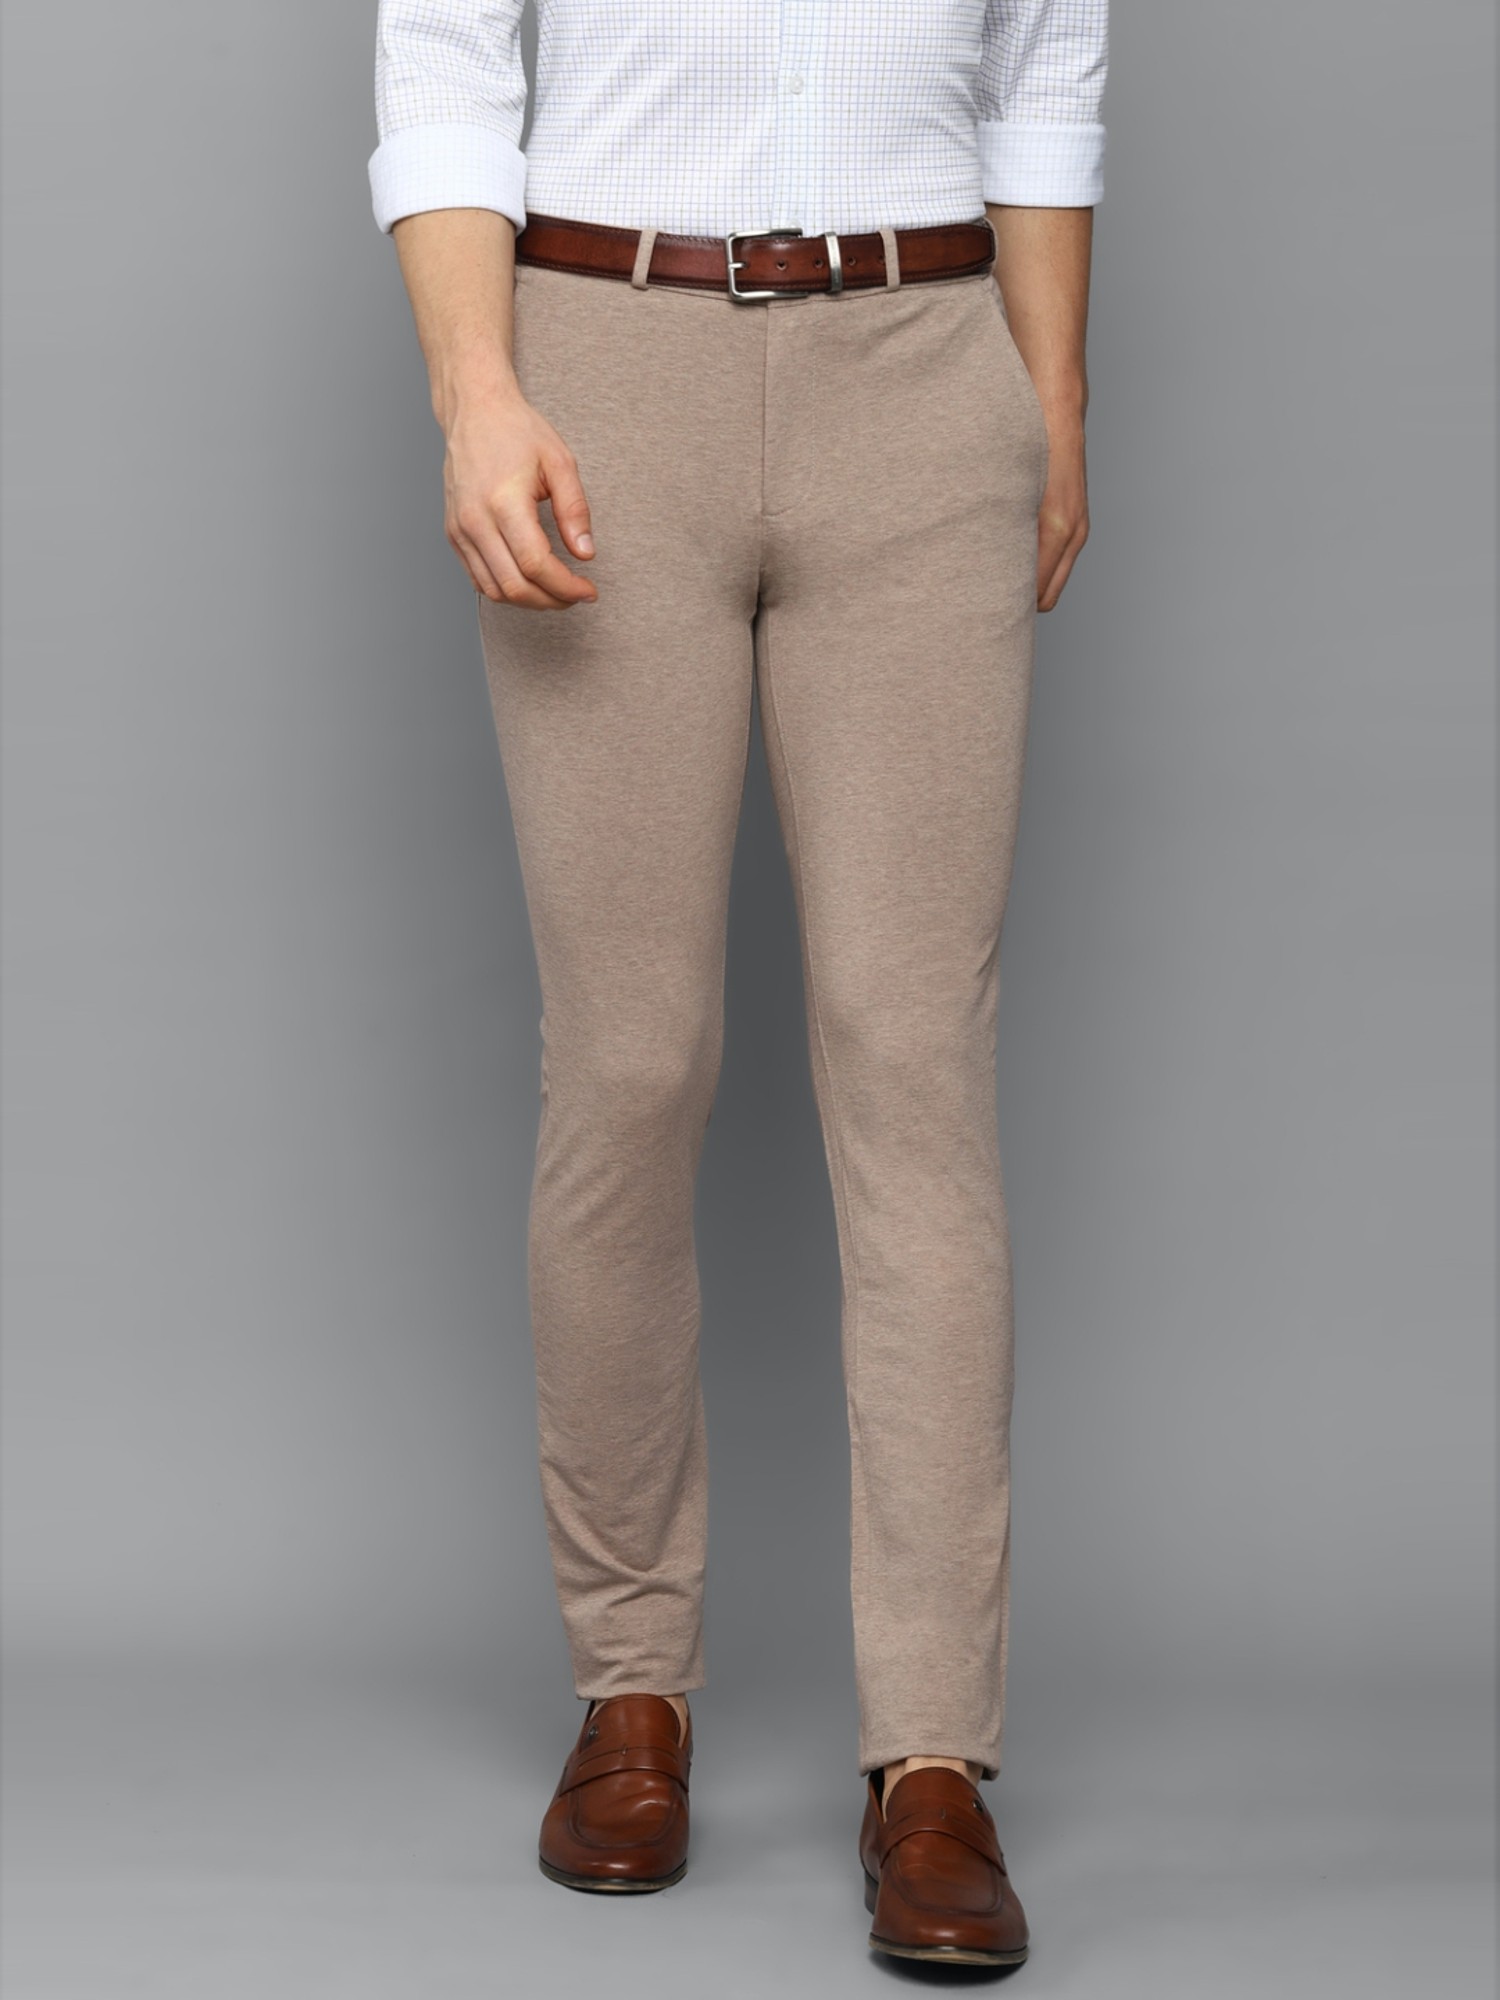 Buy men in class Light Brown Chinos Pants for Men Stretchable Slim Fit  Chinos for Men Slim fit Chinos Trousers for Mens Checked Chinos at Amazonin